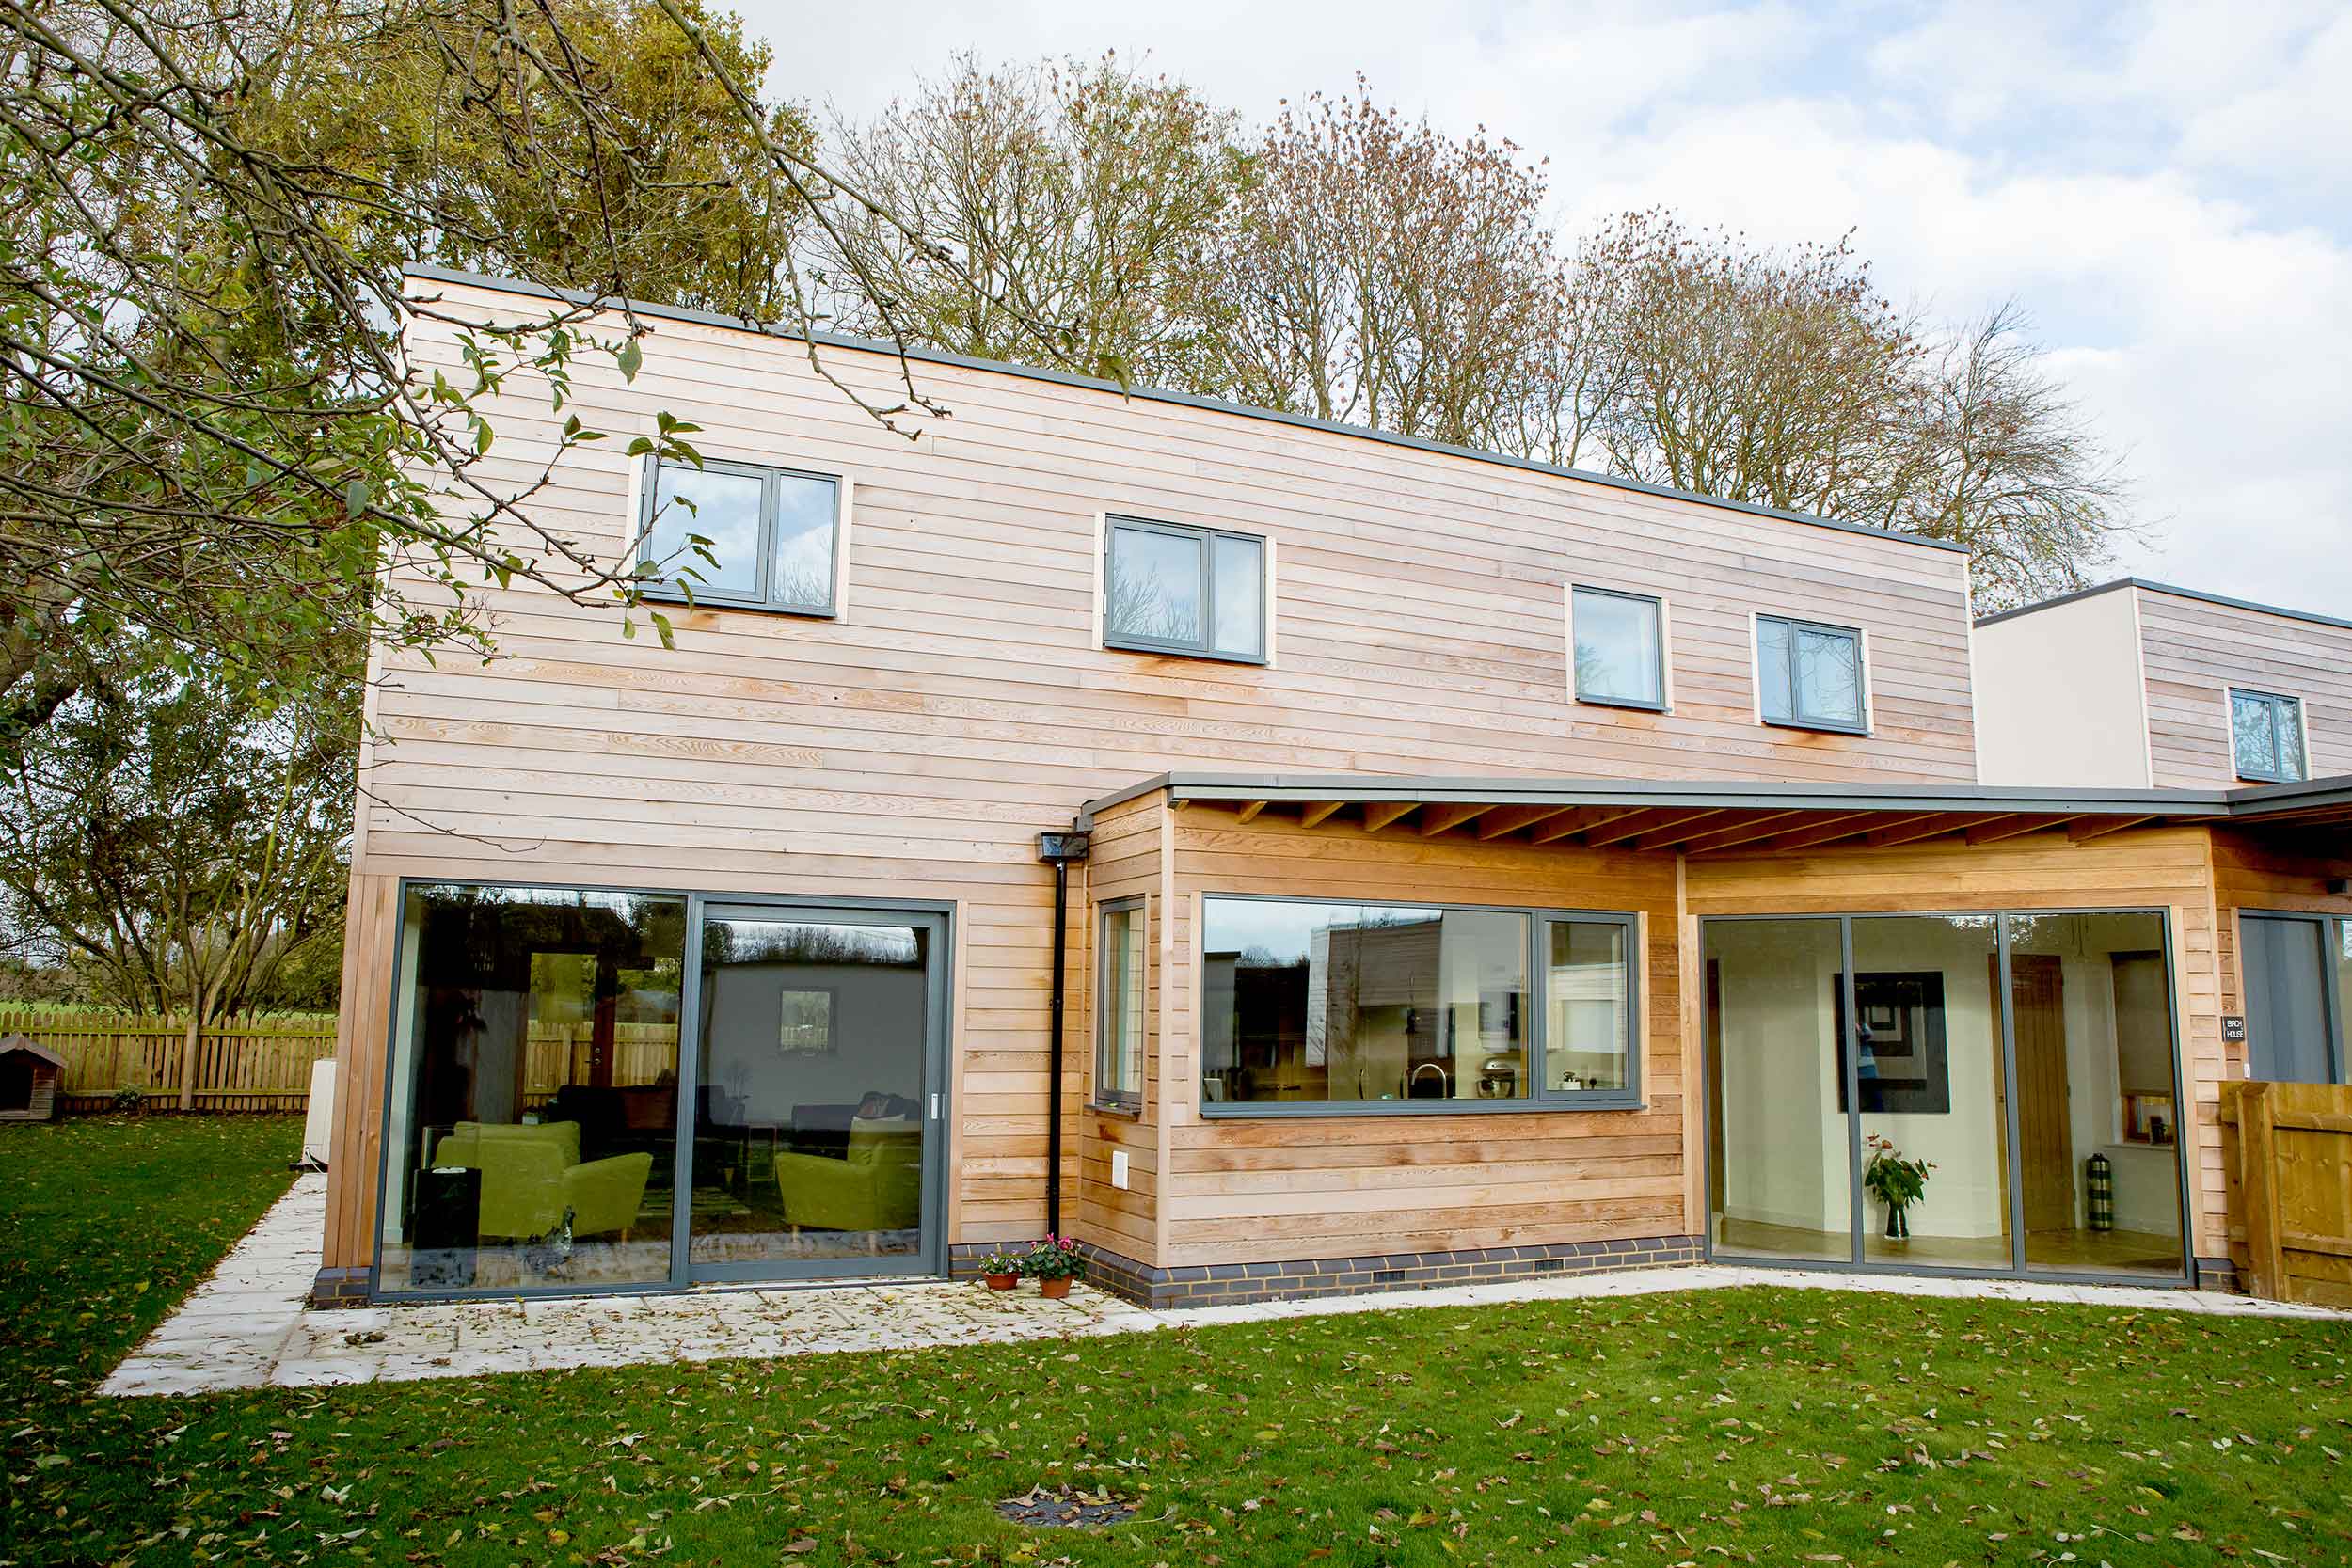 Toppesfield Road great yeldham modece architects suffolk bury st edmunds sustainable eco 